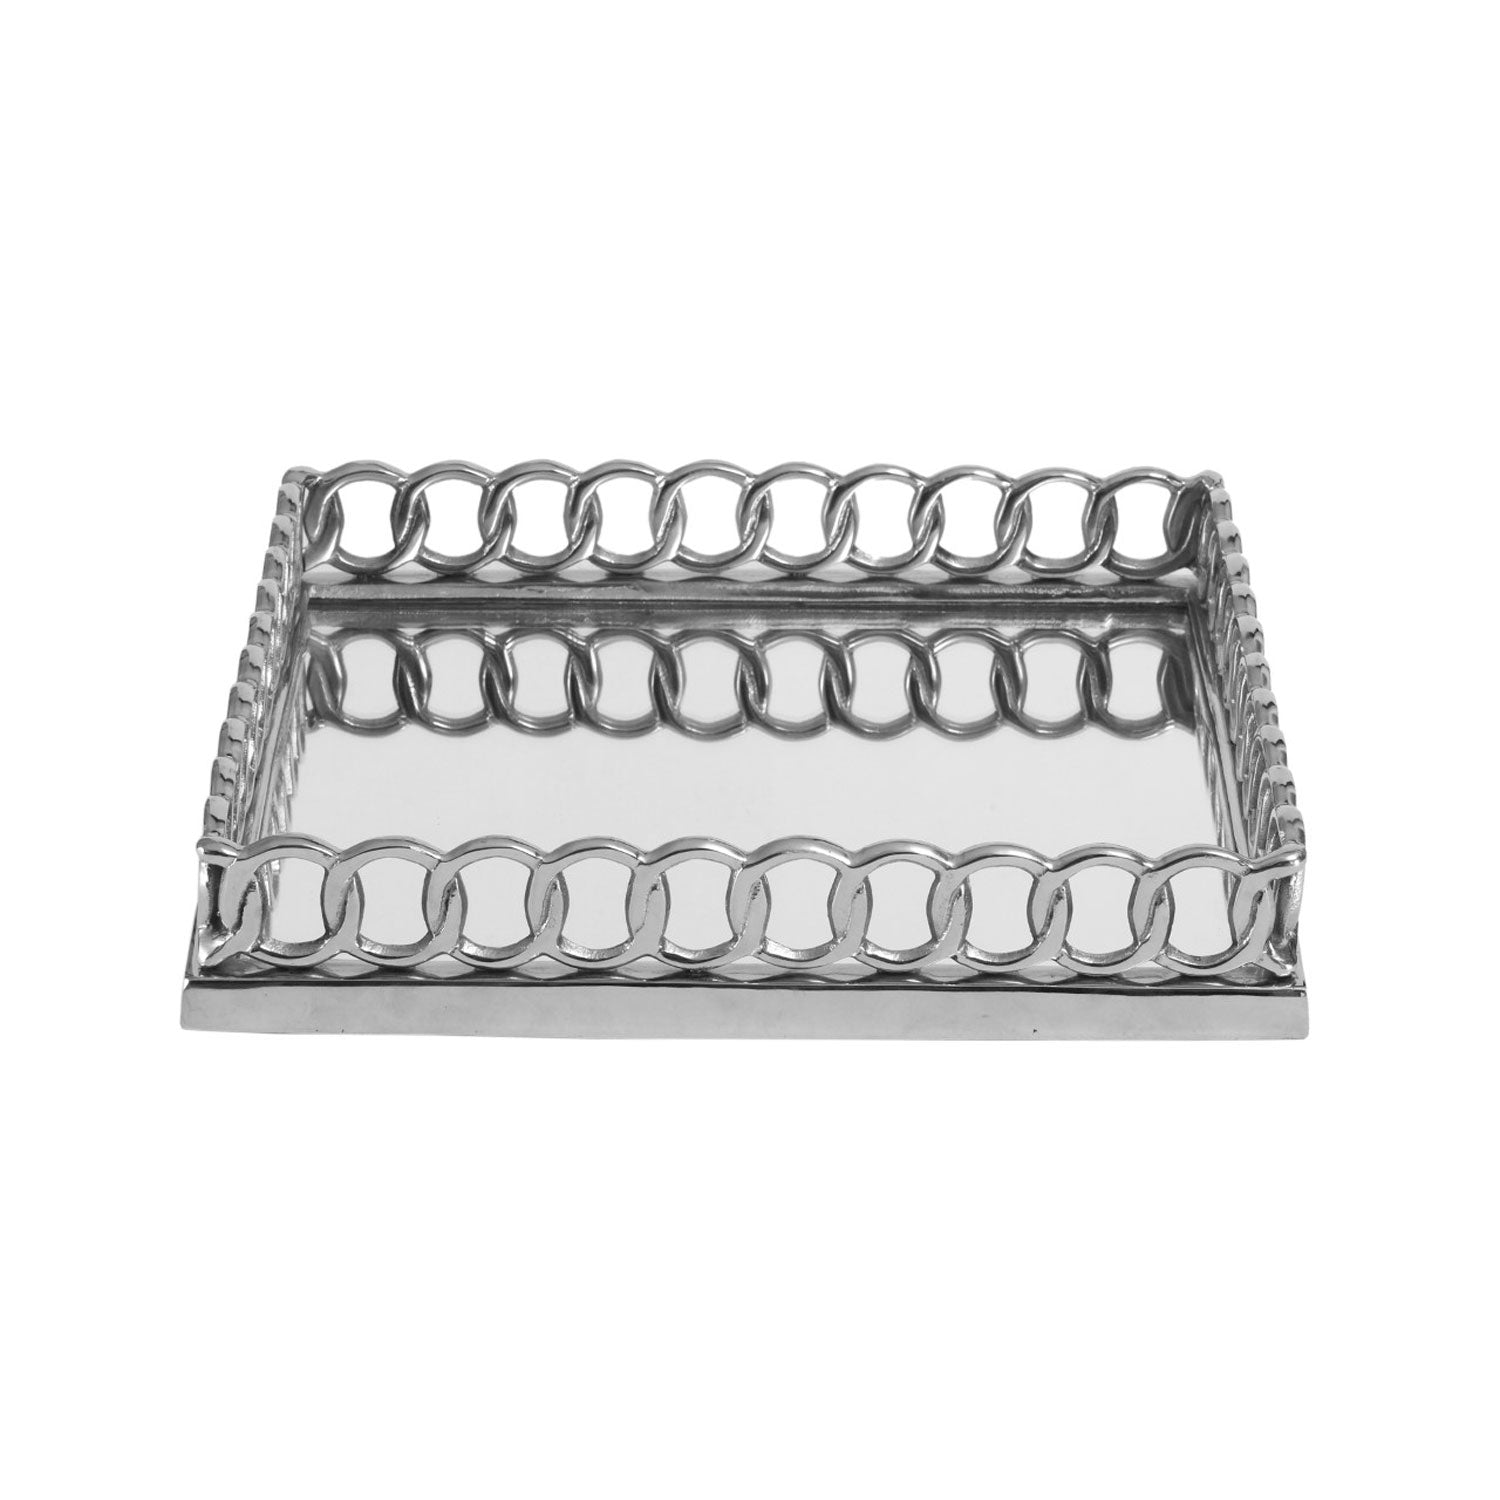 The Home Collection 35CM Chain Link Tray Chrome - Silver 1 Shaws Department Stores